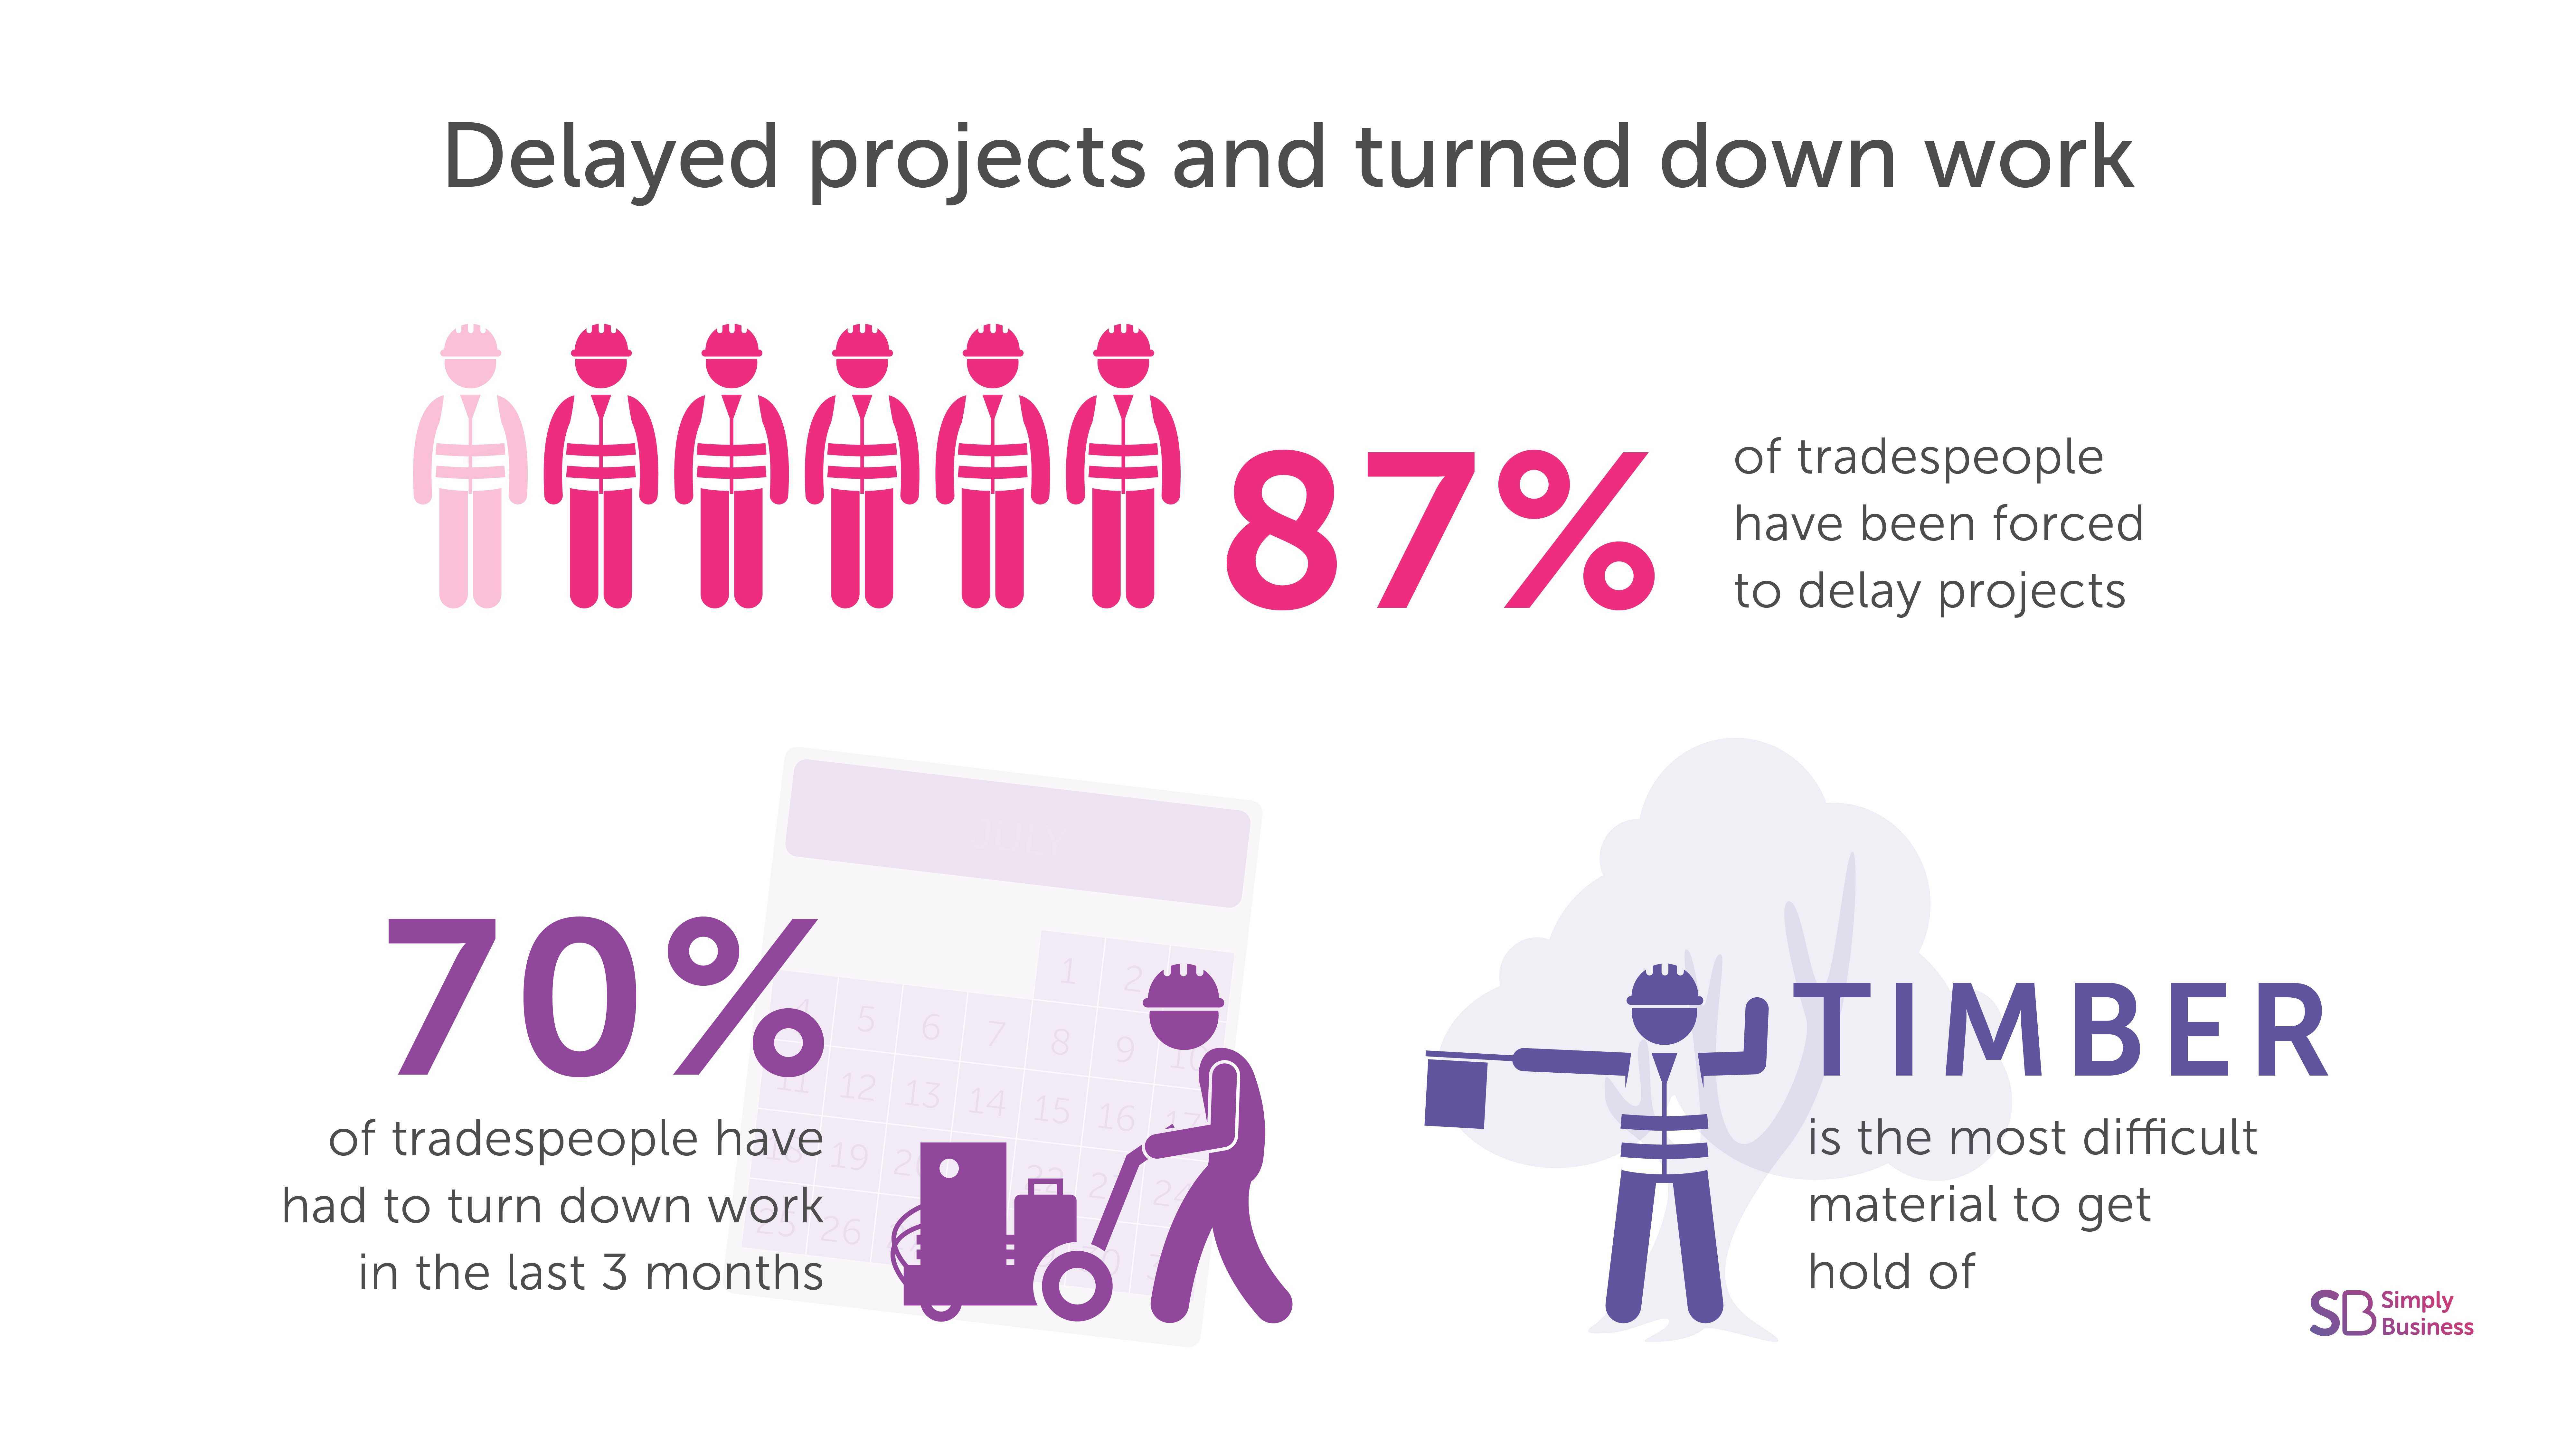 87 per cent of tradespeople have been forced to turn down projects